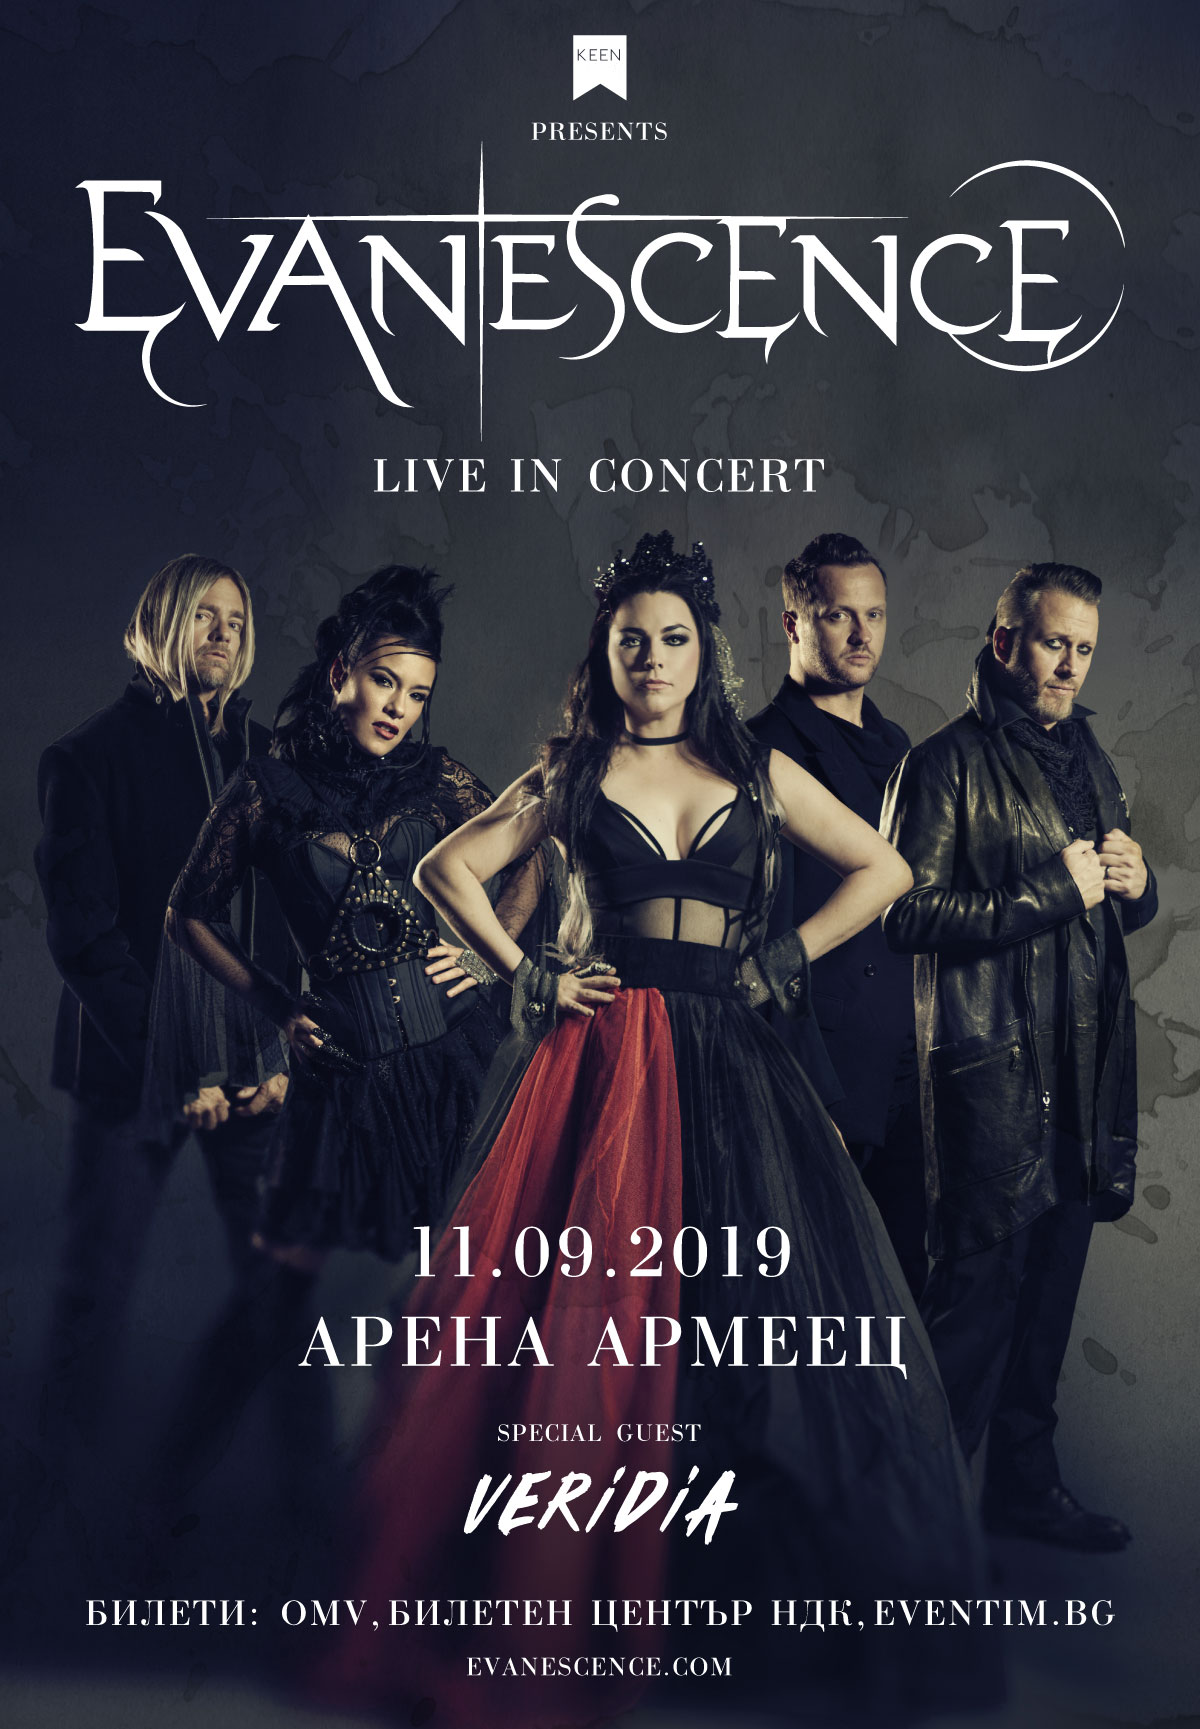 evanescence tour poster